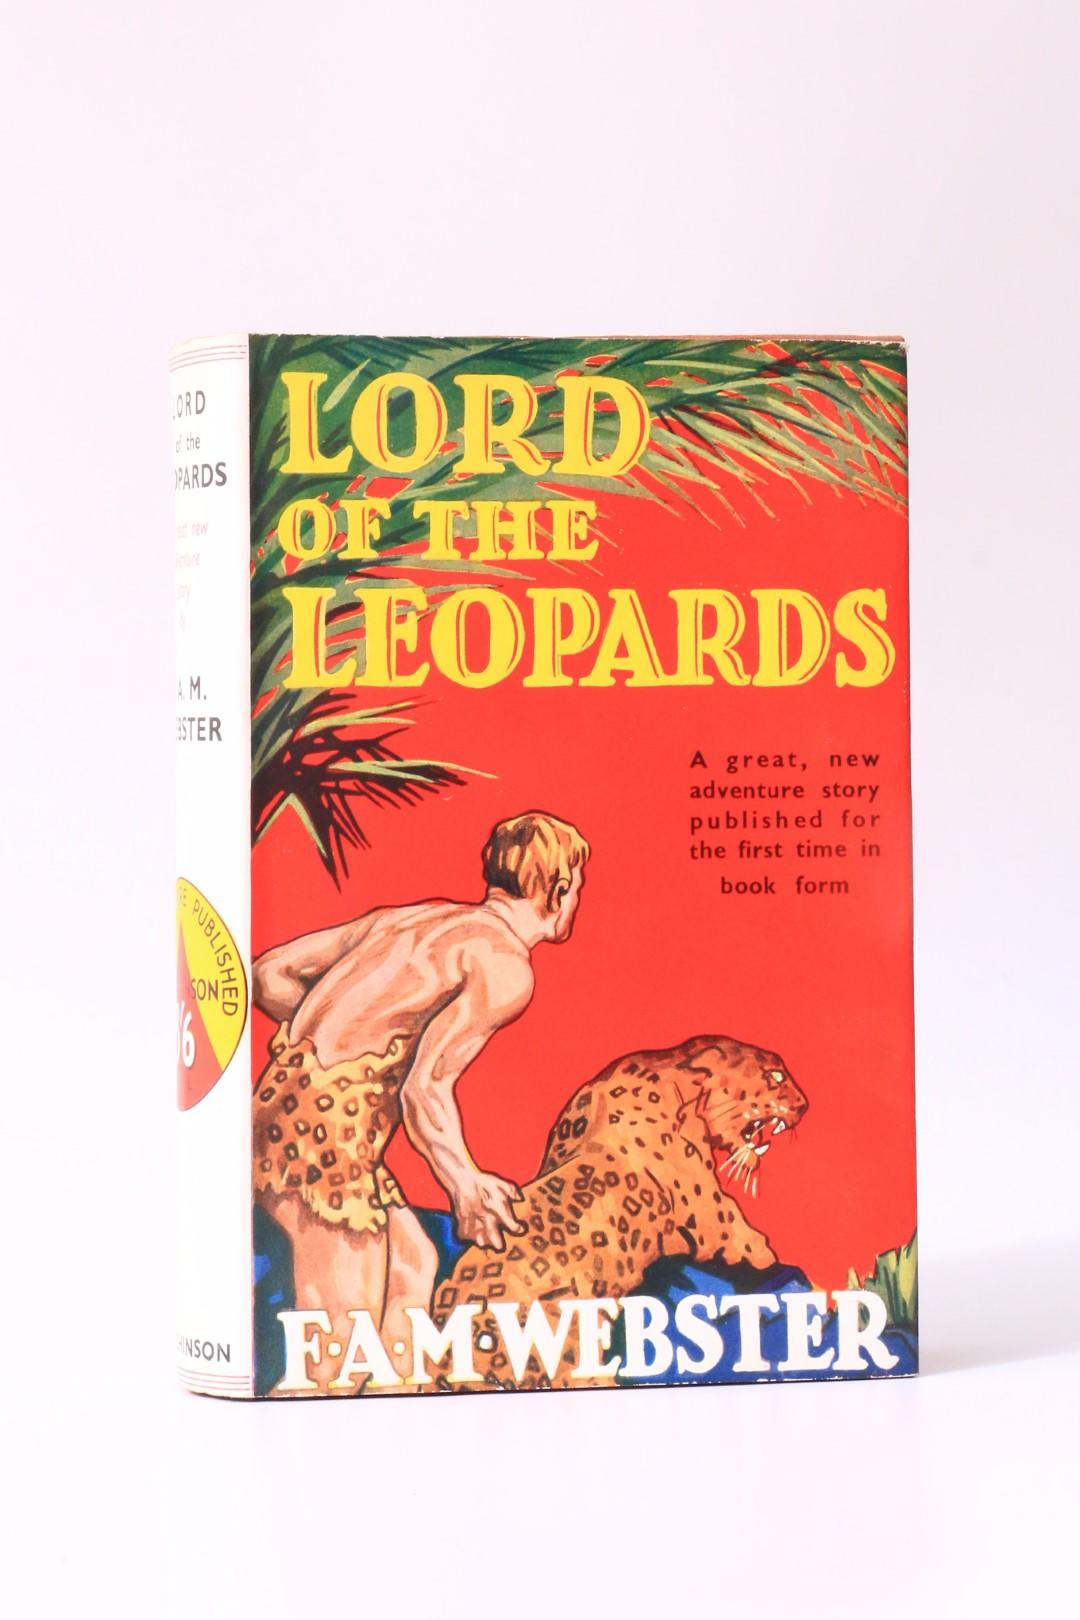 F.A.M. Webster - Lord of the Leopards - Hutchinson, 1935, First Edition.